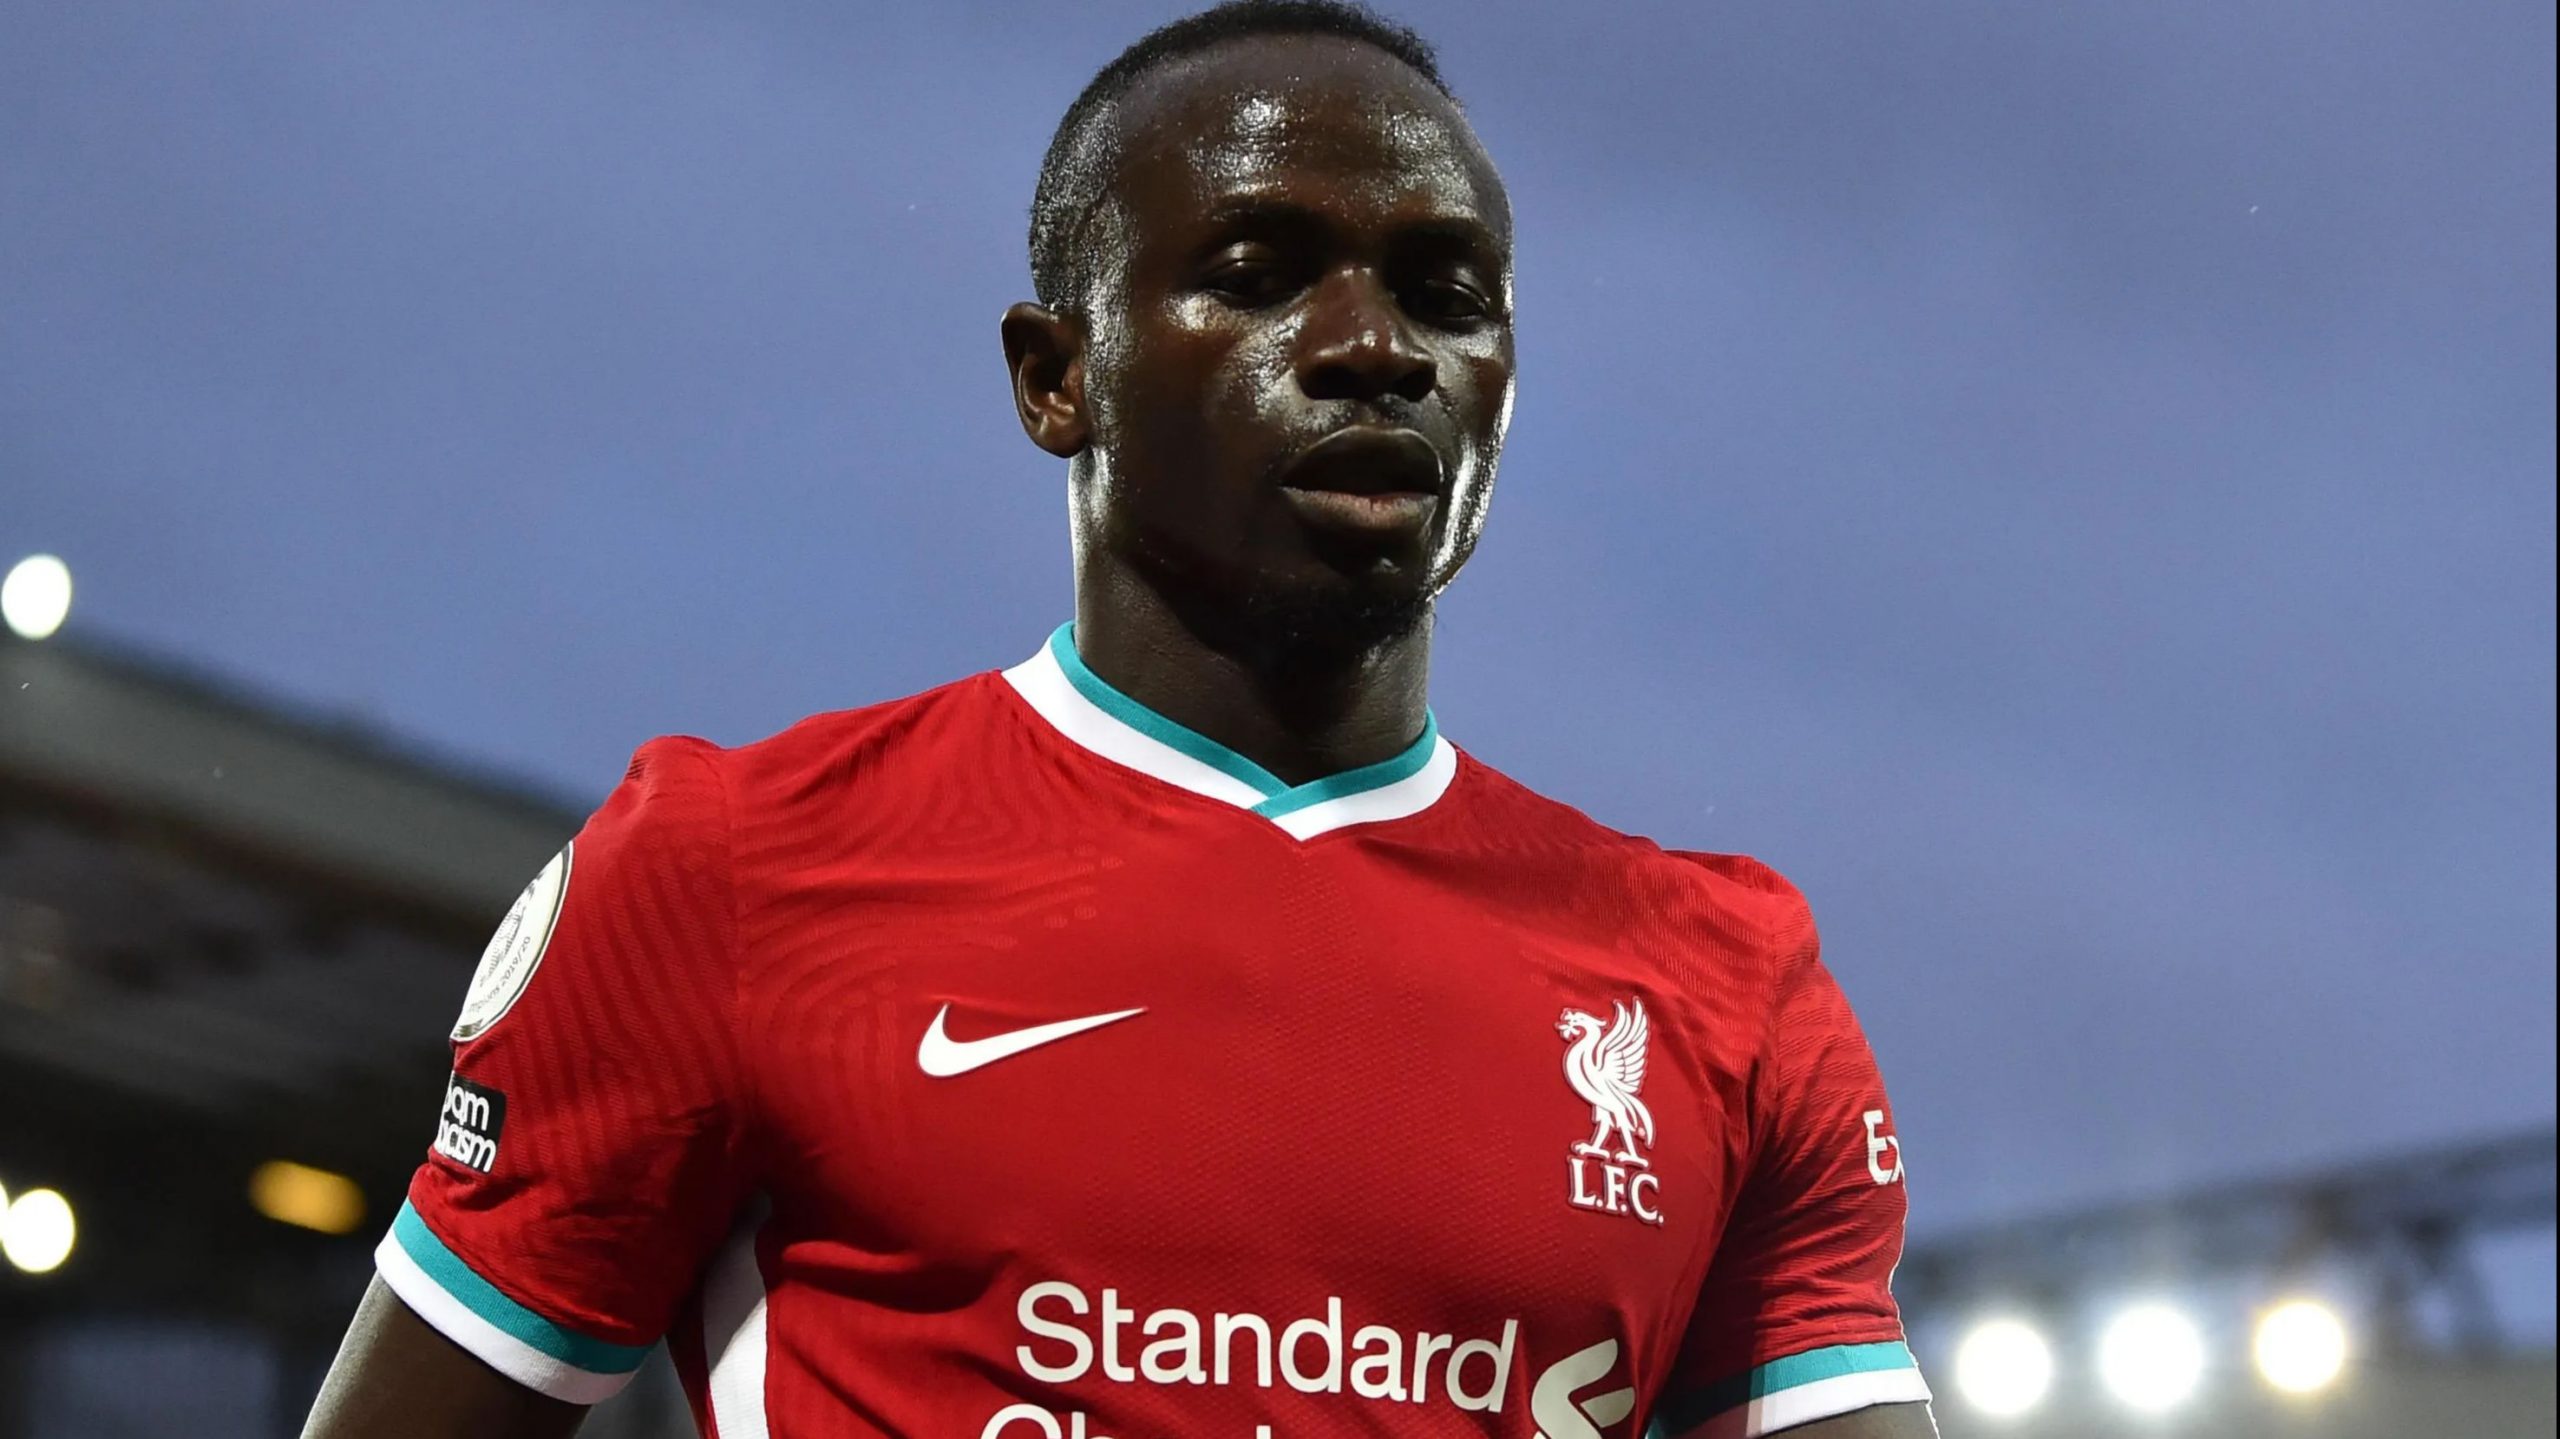 Liverpool’s Sadio Mane opens up about ‘worst season’ of his career